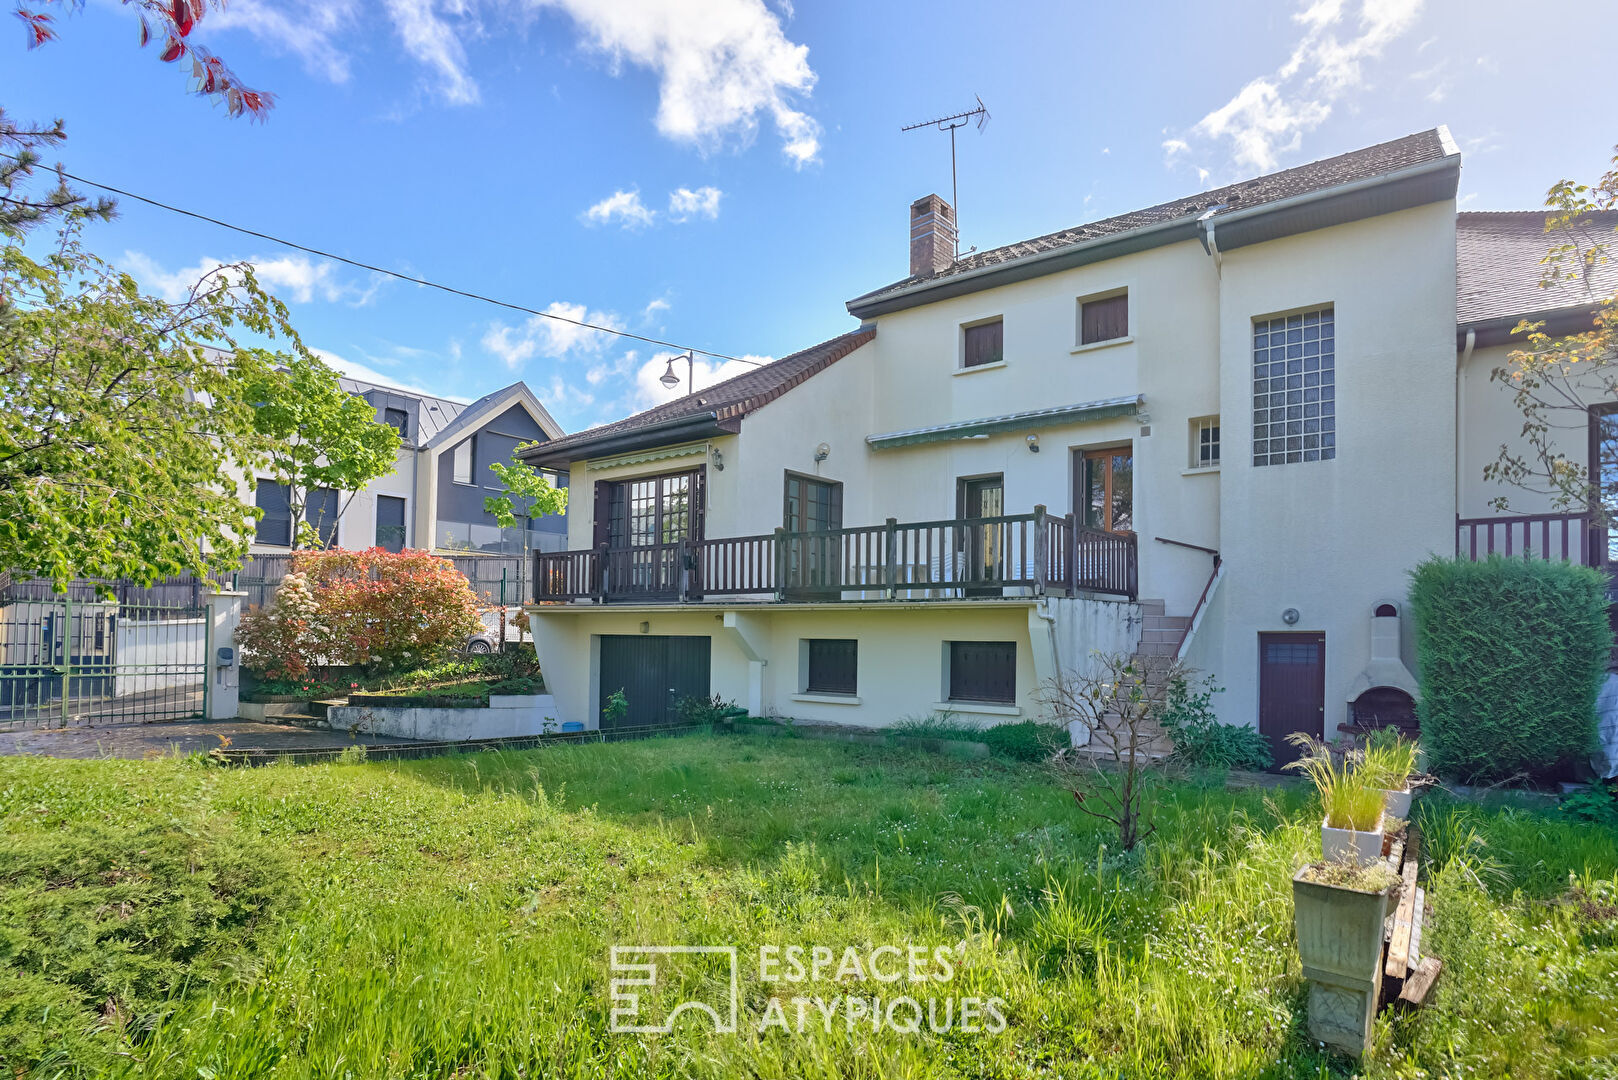 House with terrace and garden in a quiet Coteaux neighborhood